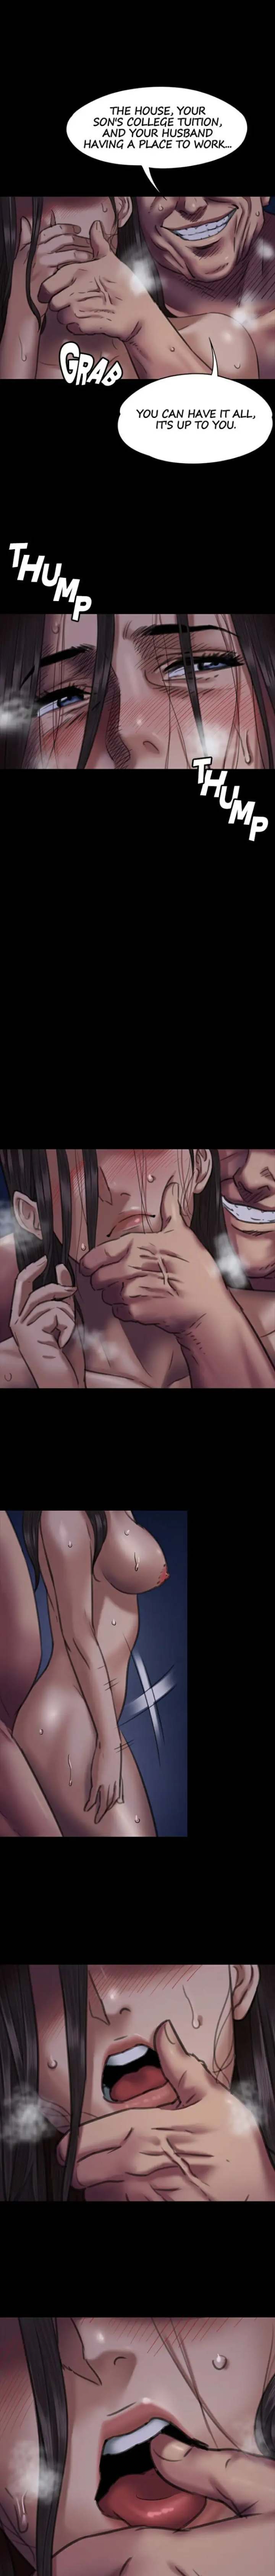 Panel Image 1 for chapter 64 of manhwa Queen Bee on read.oppai.stream